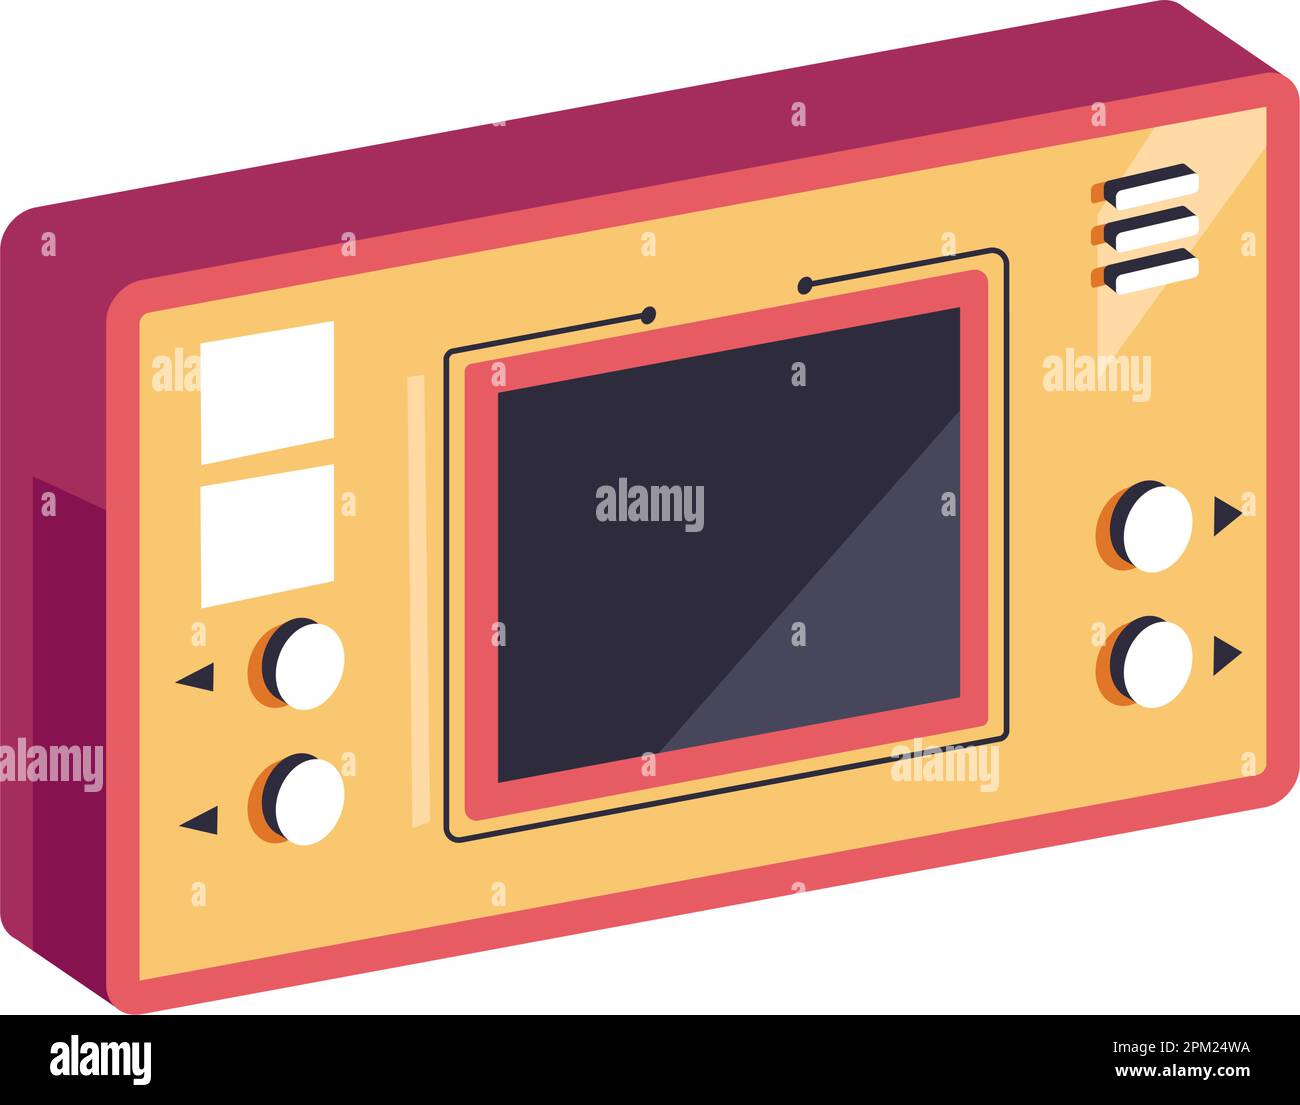 Retro old school PSP gadget with buttons for games Stock Vector